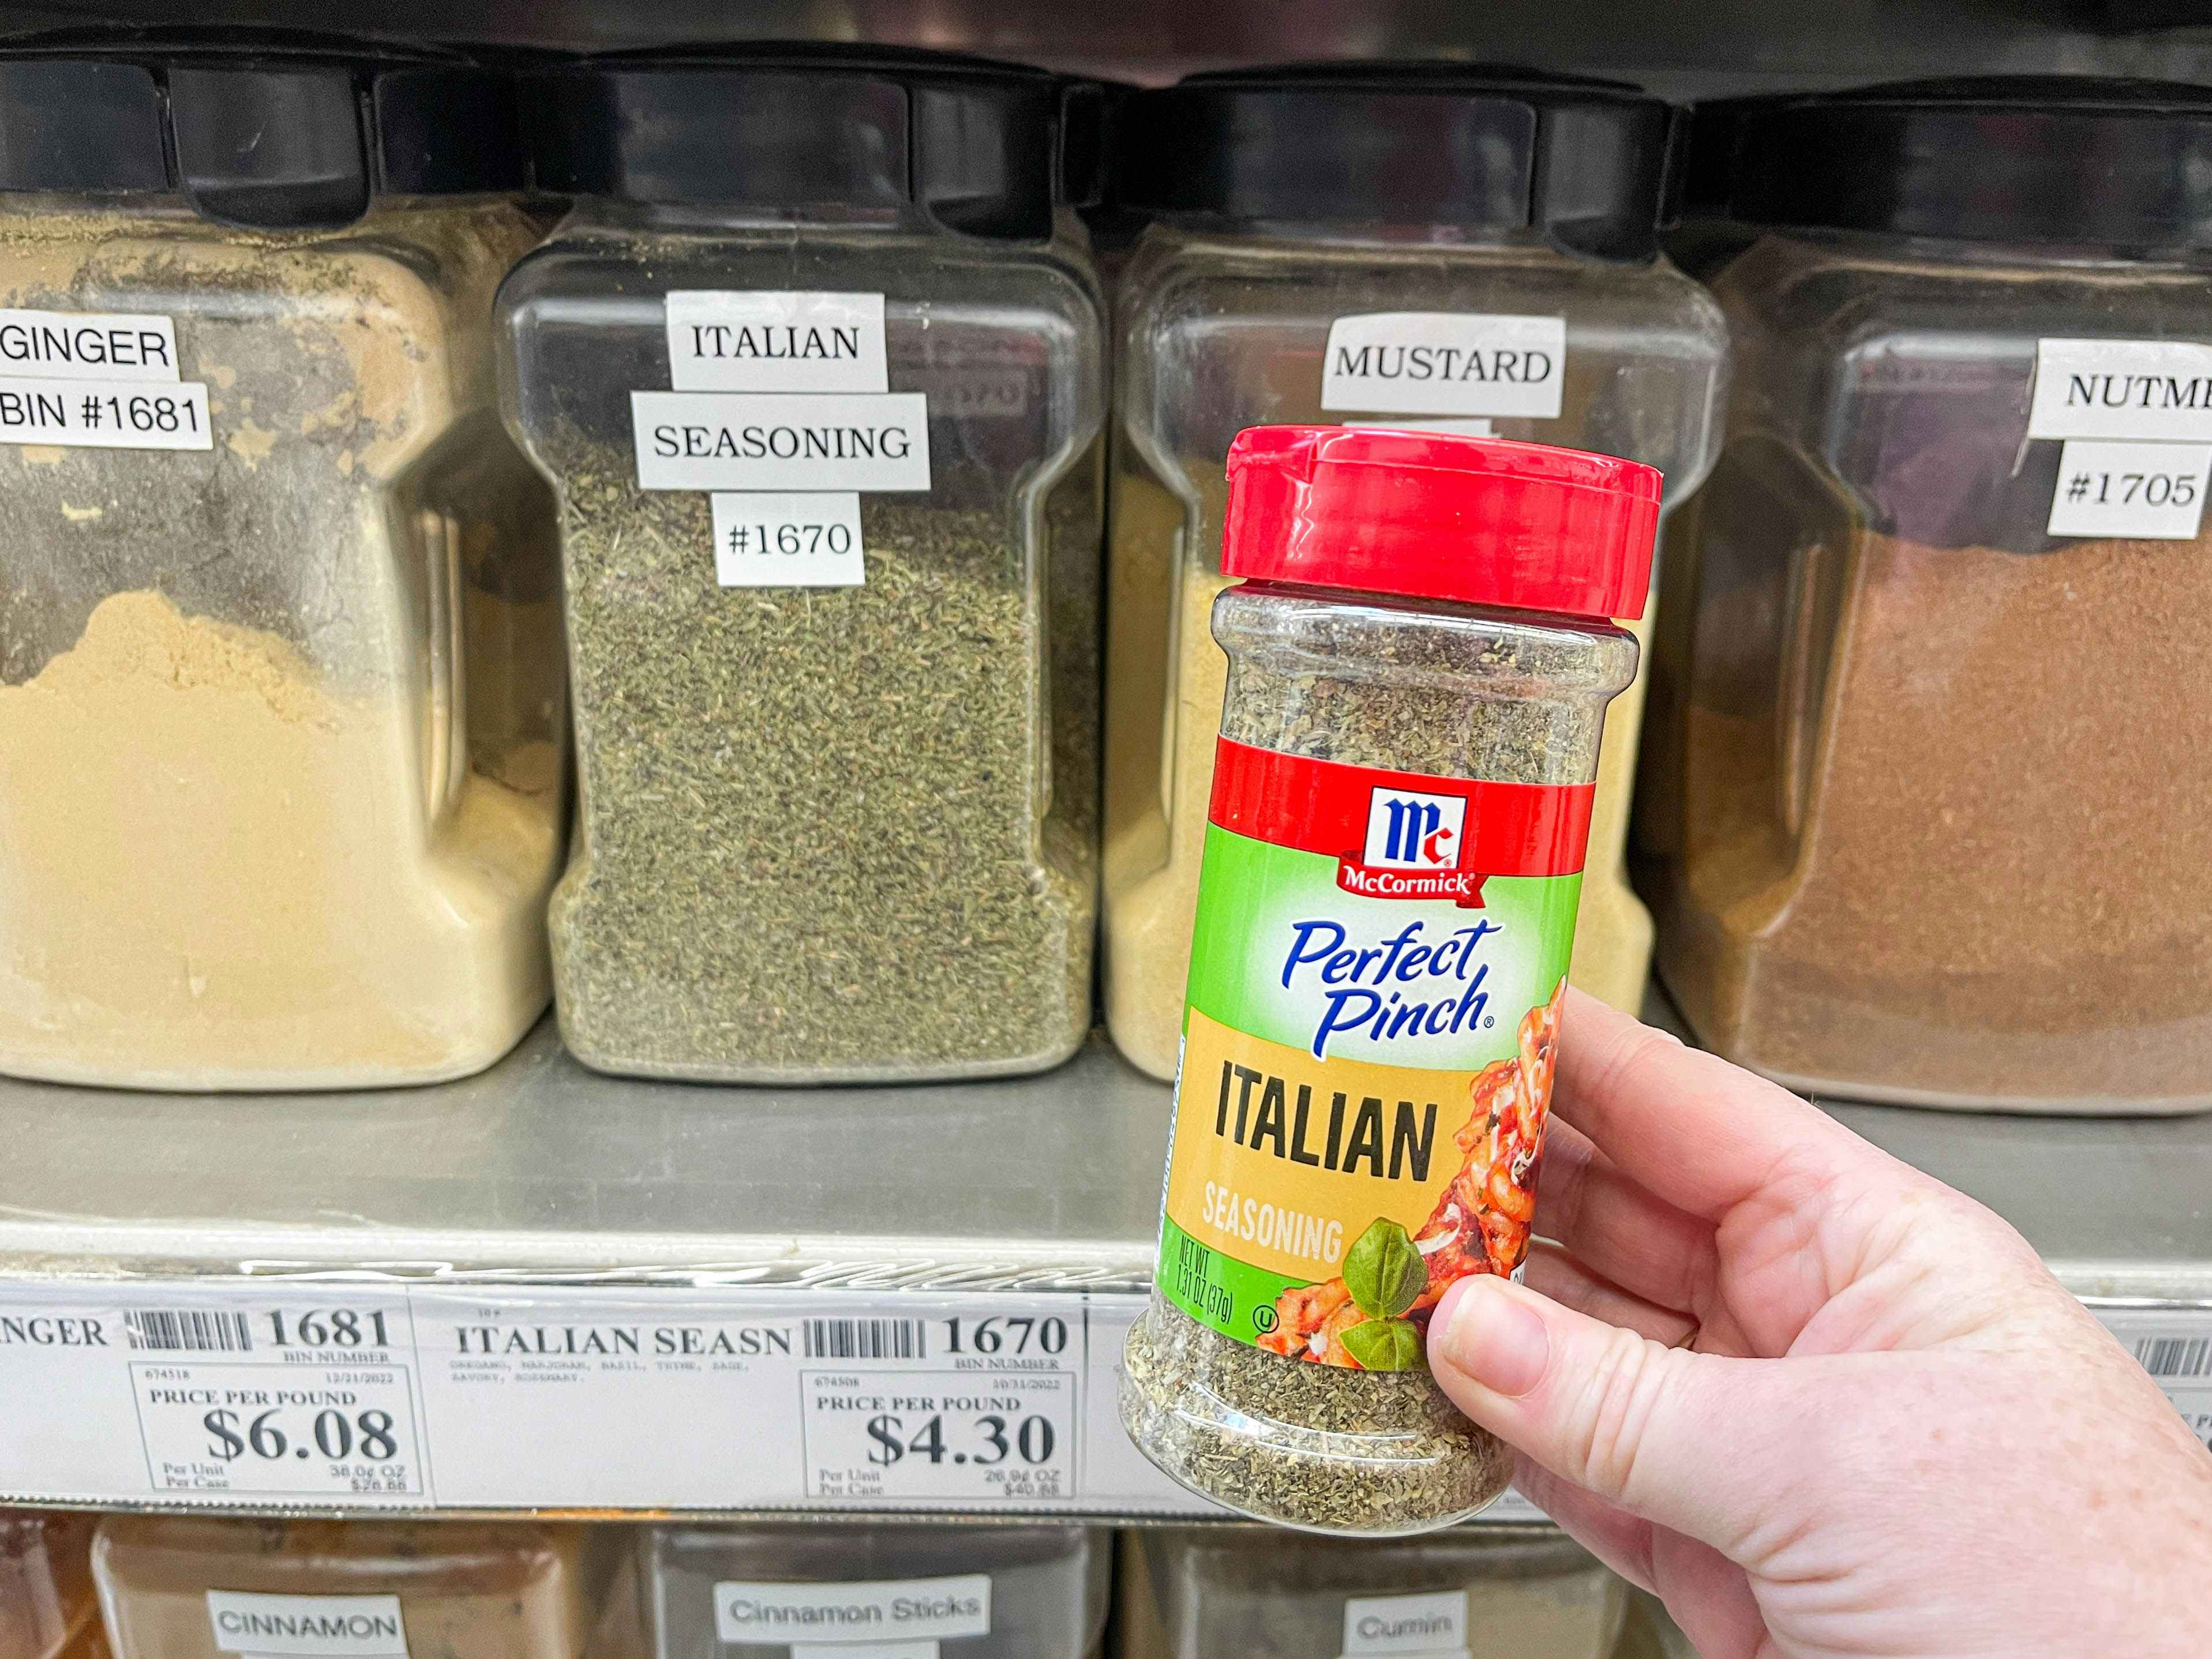 a bottle of itallian seasoning being held in fromt of winco bulk spices